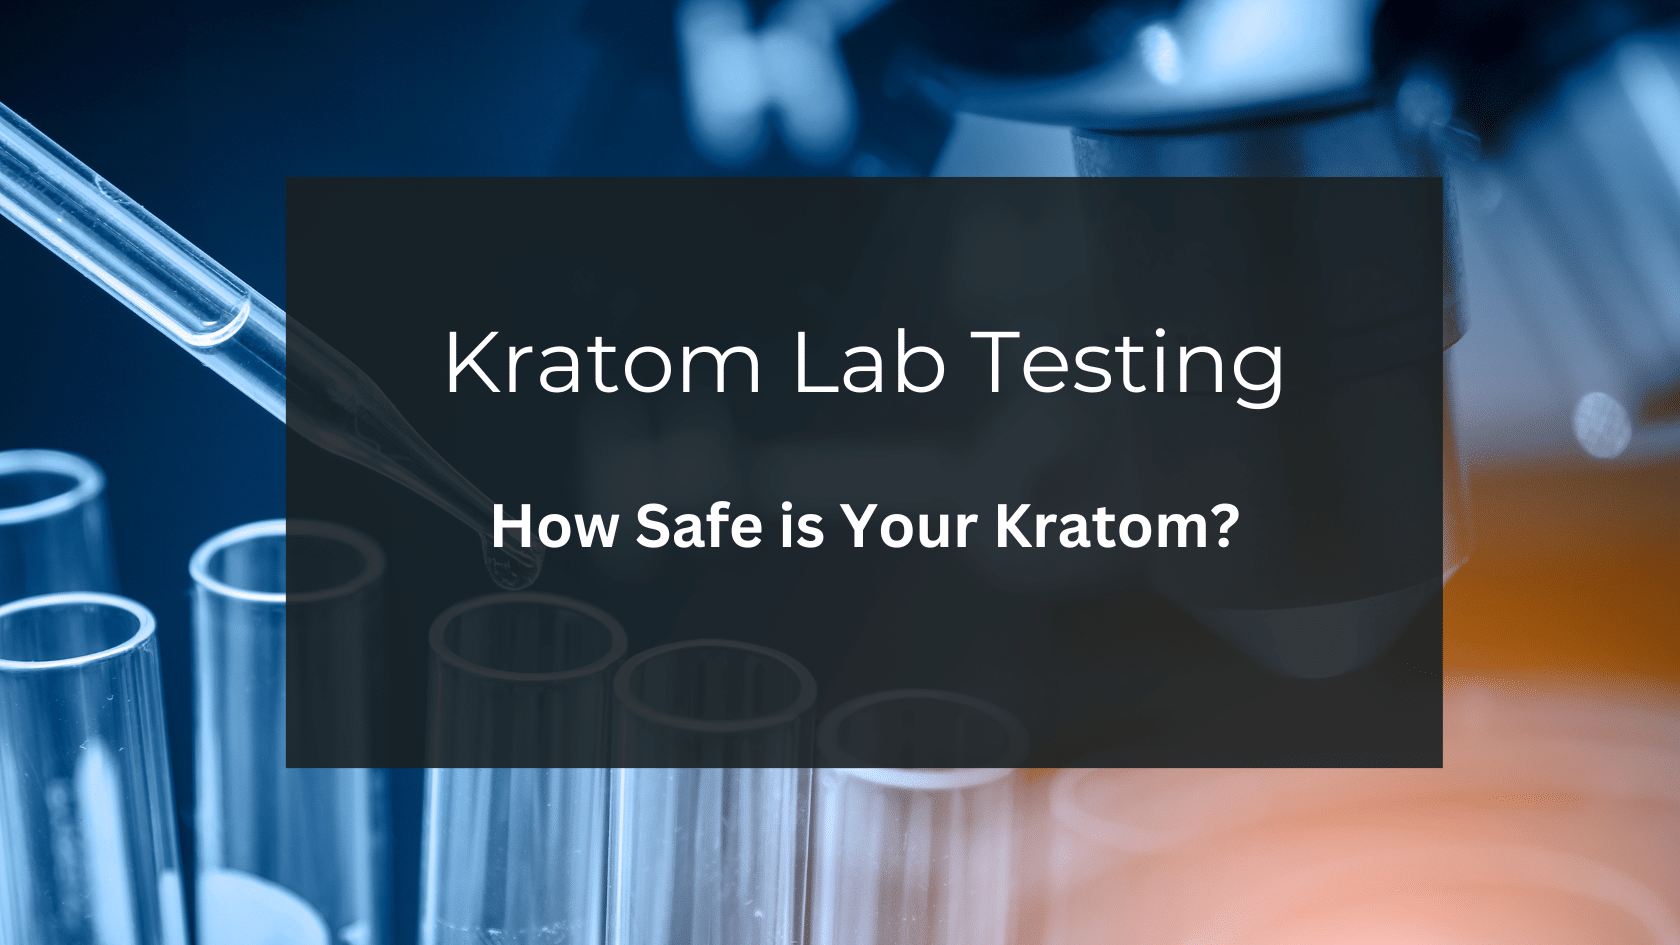 Katom lab conducting a comprehensive safety assessment on your katom.